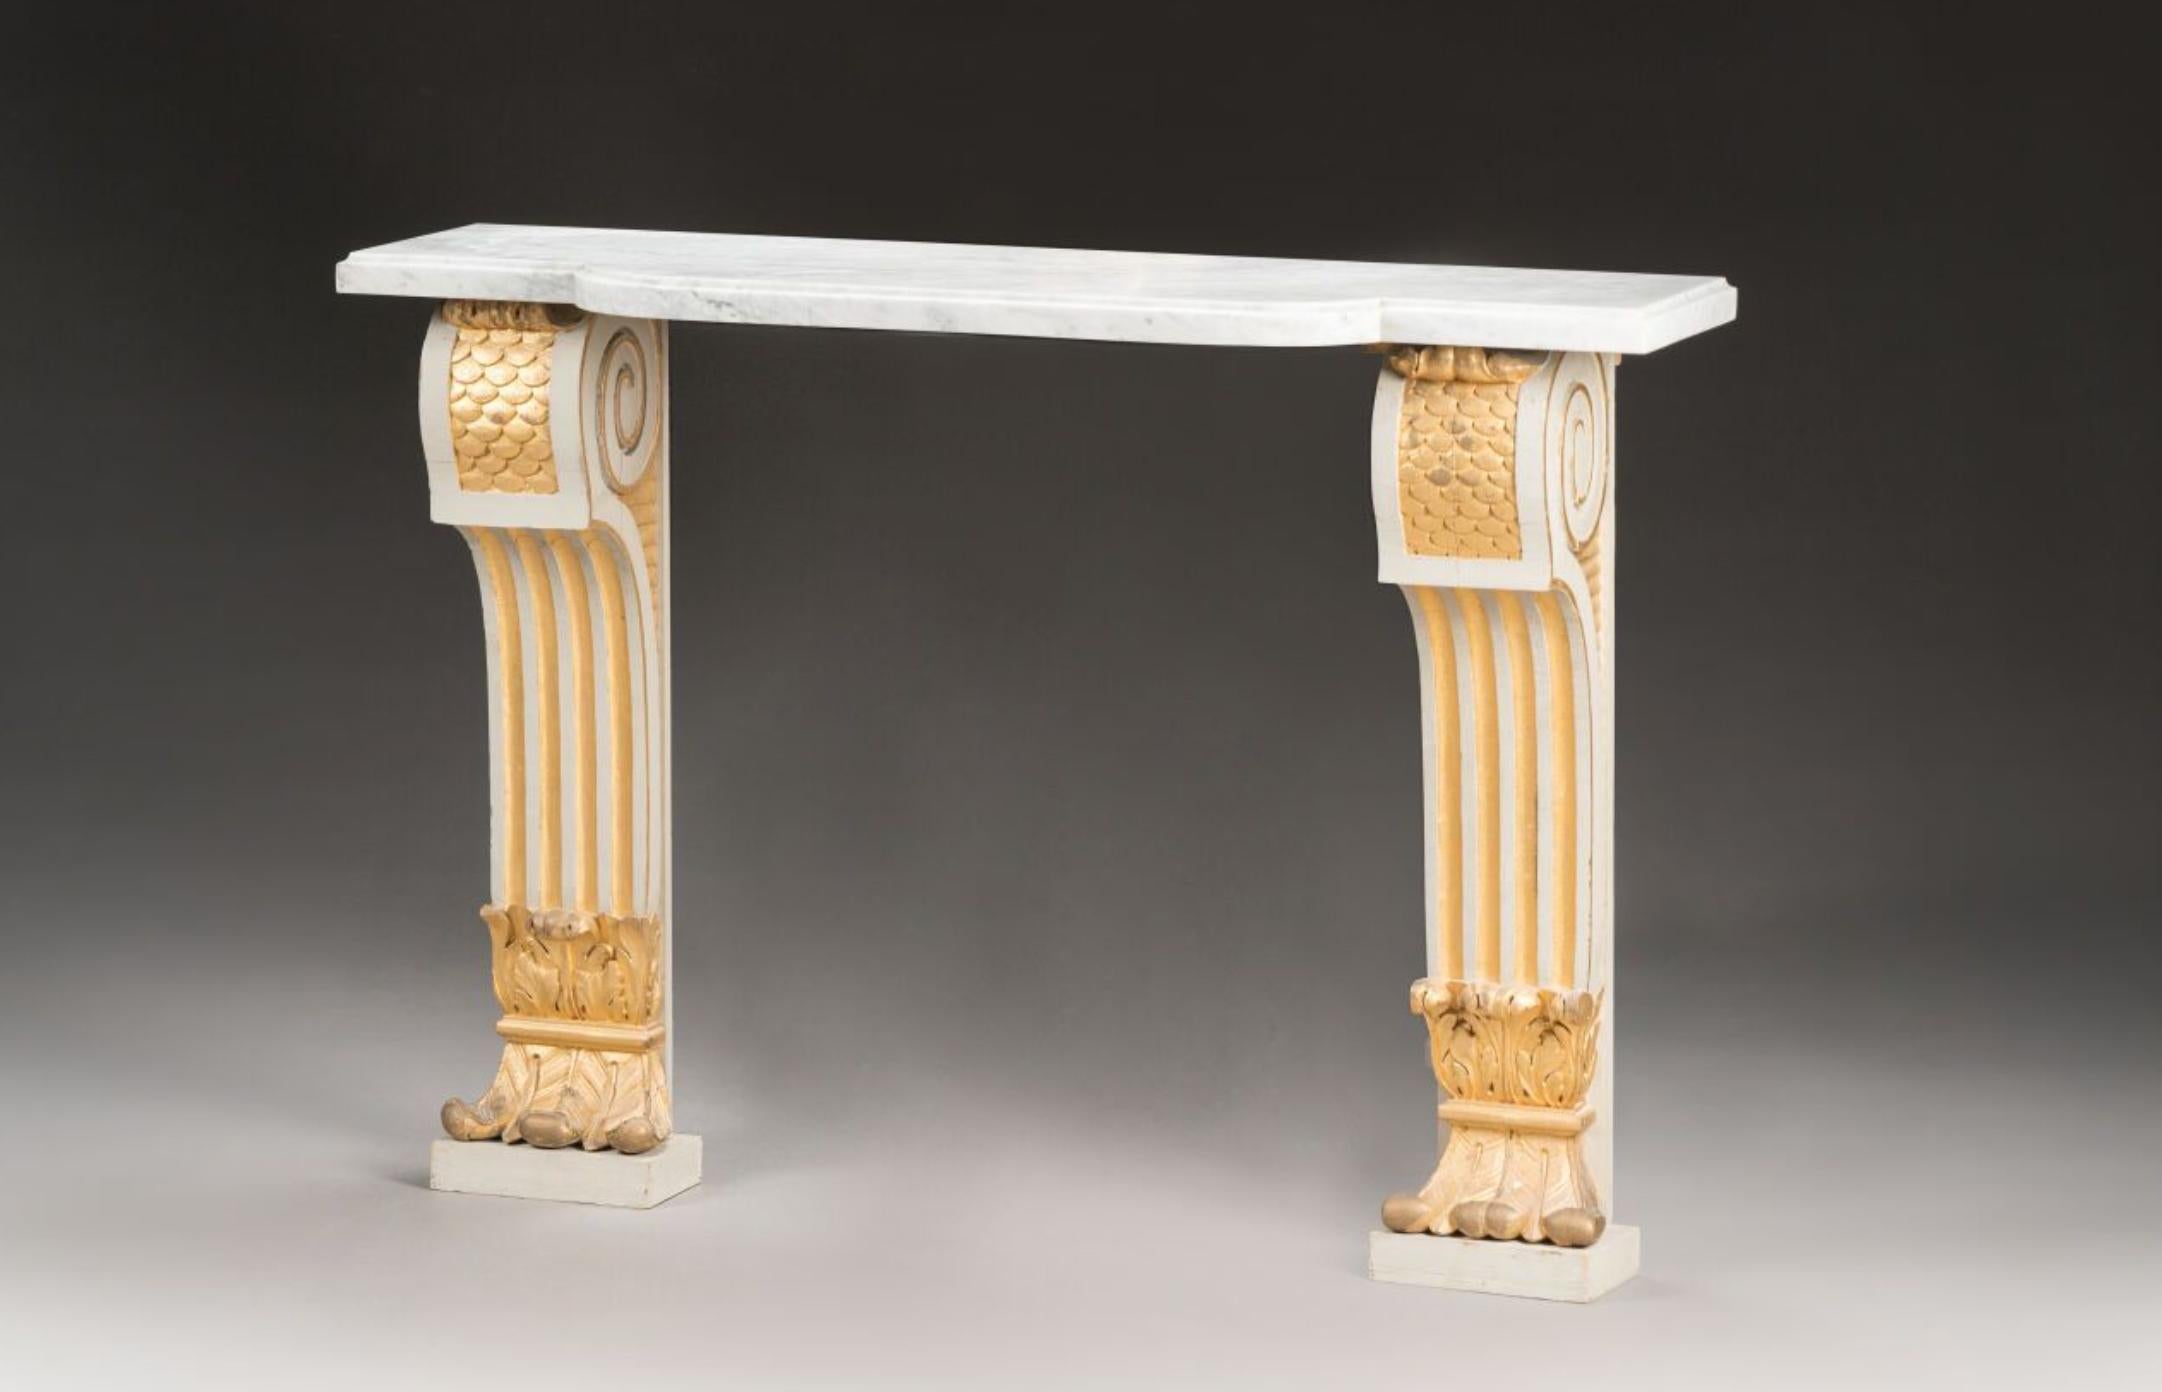 19th Century French hand carved gilt wood console table in Louis XVI Style with lovely white marble top raised on hand painted base. Very good authentic condition with no restorations made.
France, circa 1890